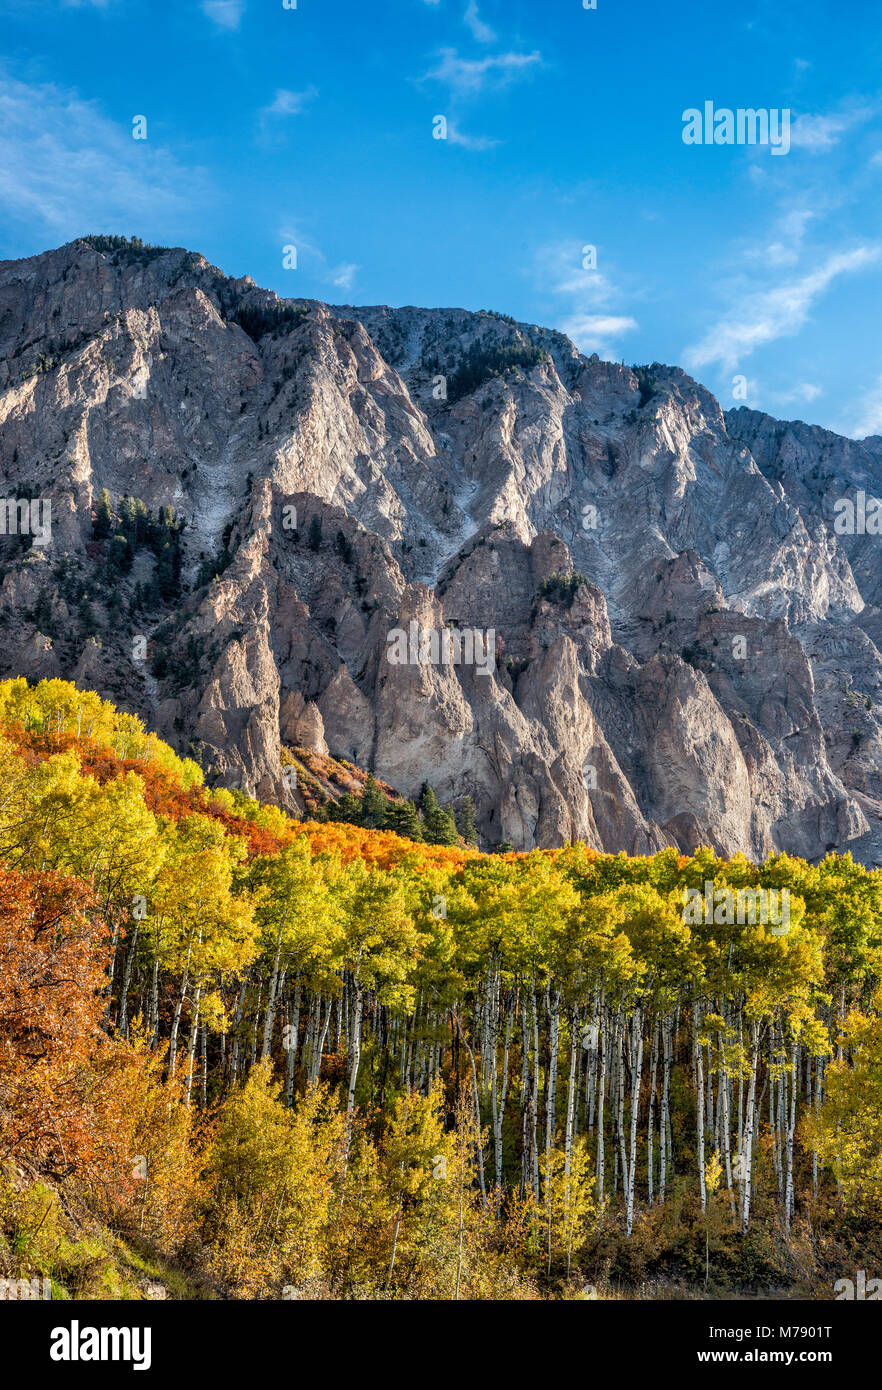 Marcellina Mountain, aspens in fall foliage, seen from West Elk Loop Scenic Byway, Gunnison National Forest, West Elk Mountains, Colorado, USA Stock Photo